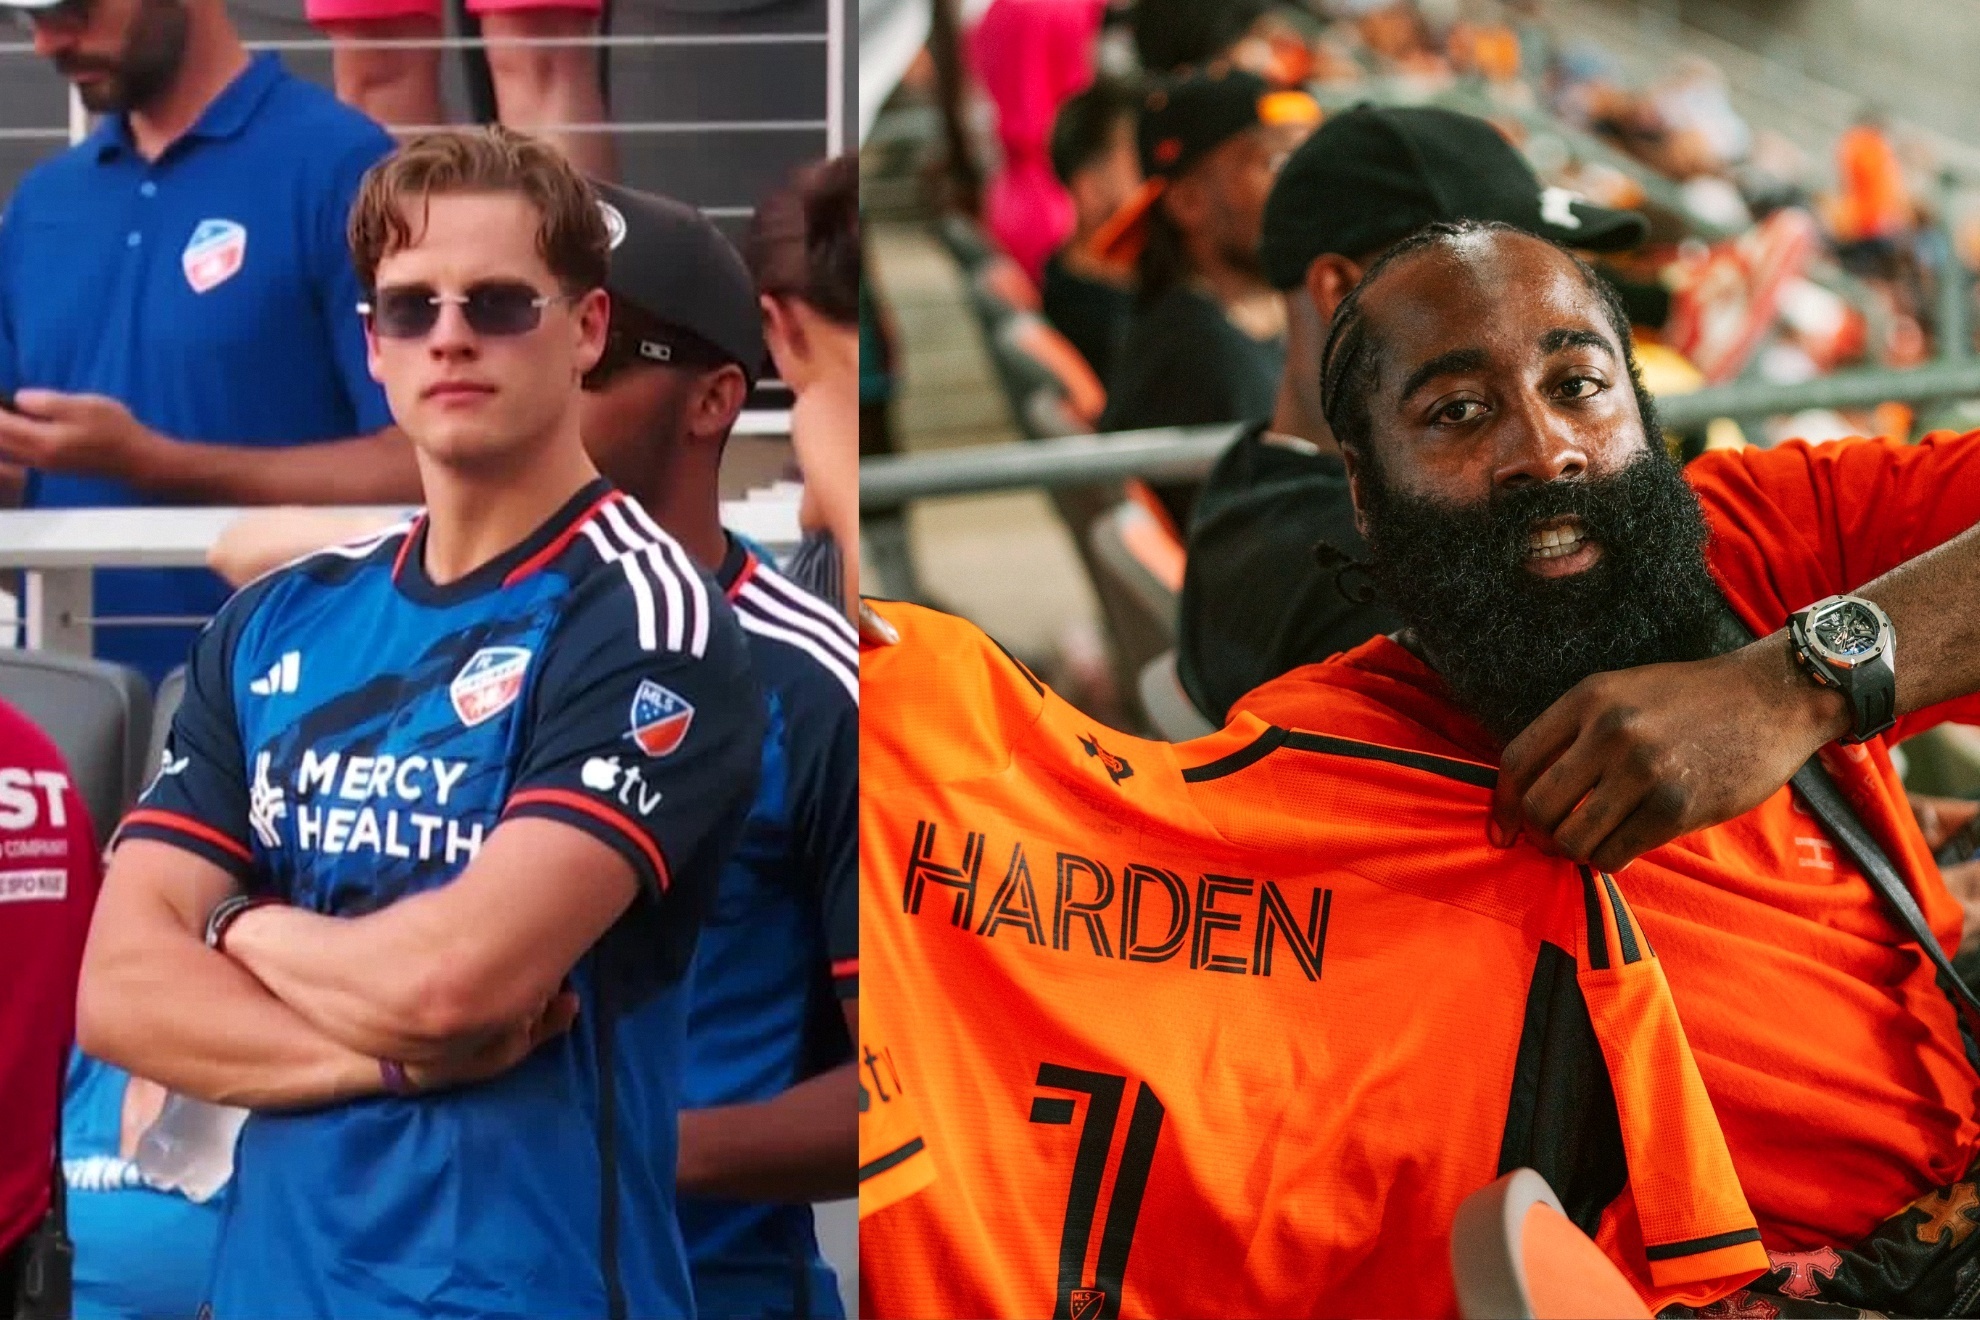 Joe Burrow and James Harden attend U.S. Open Cup semifinal games.